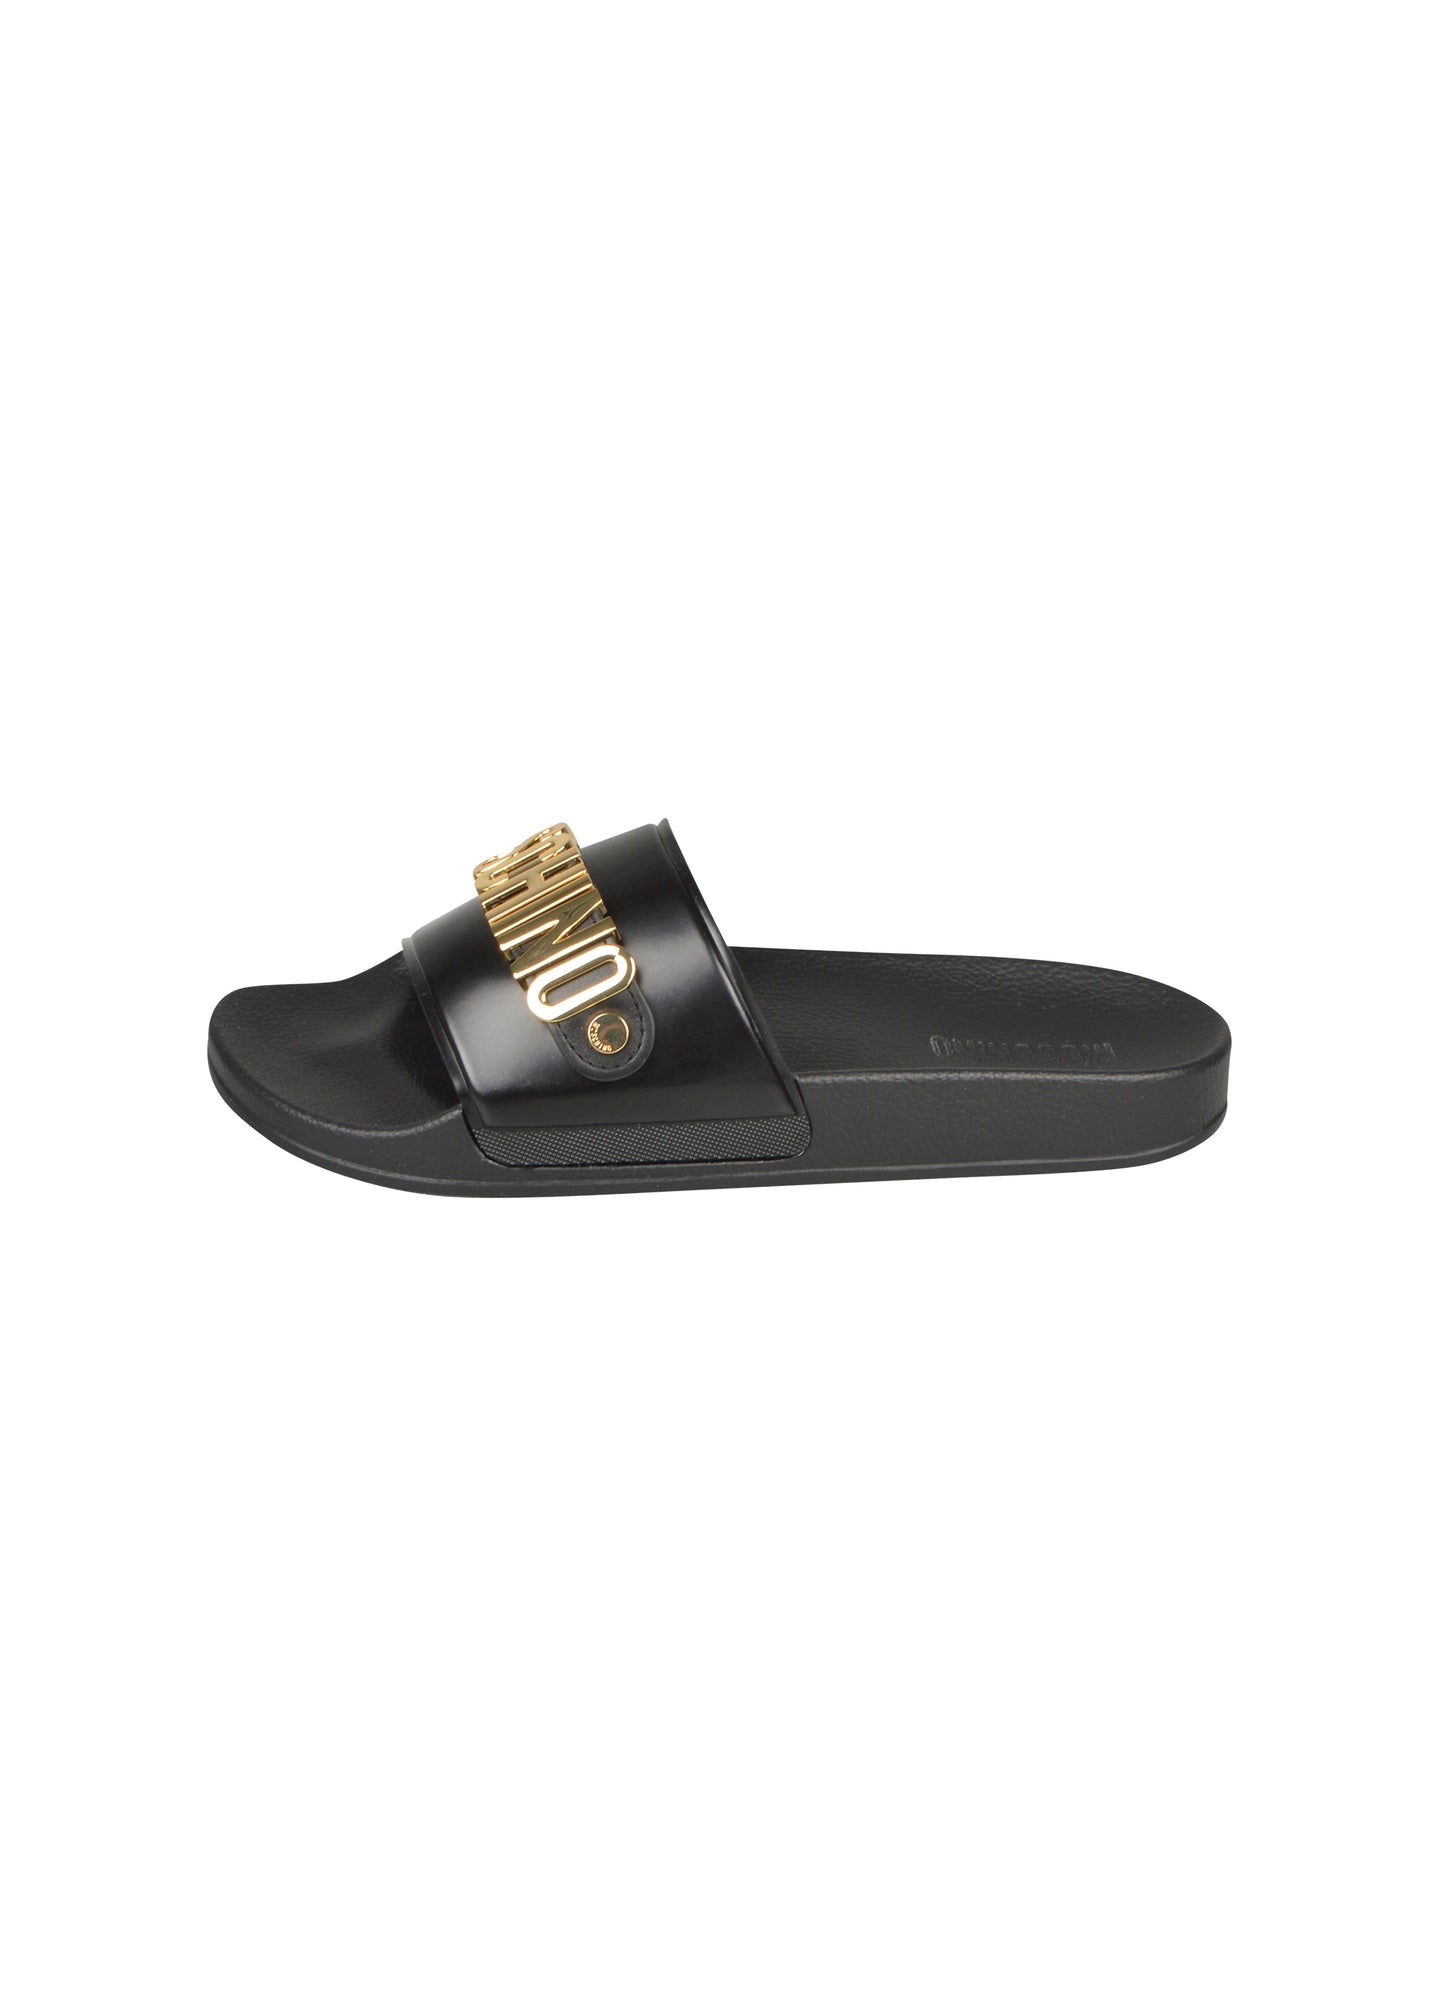 Moschino - Pool Sliders Heavy Metal MOSCHINO Gold Lettering on strap - 200310 - Black Gold